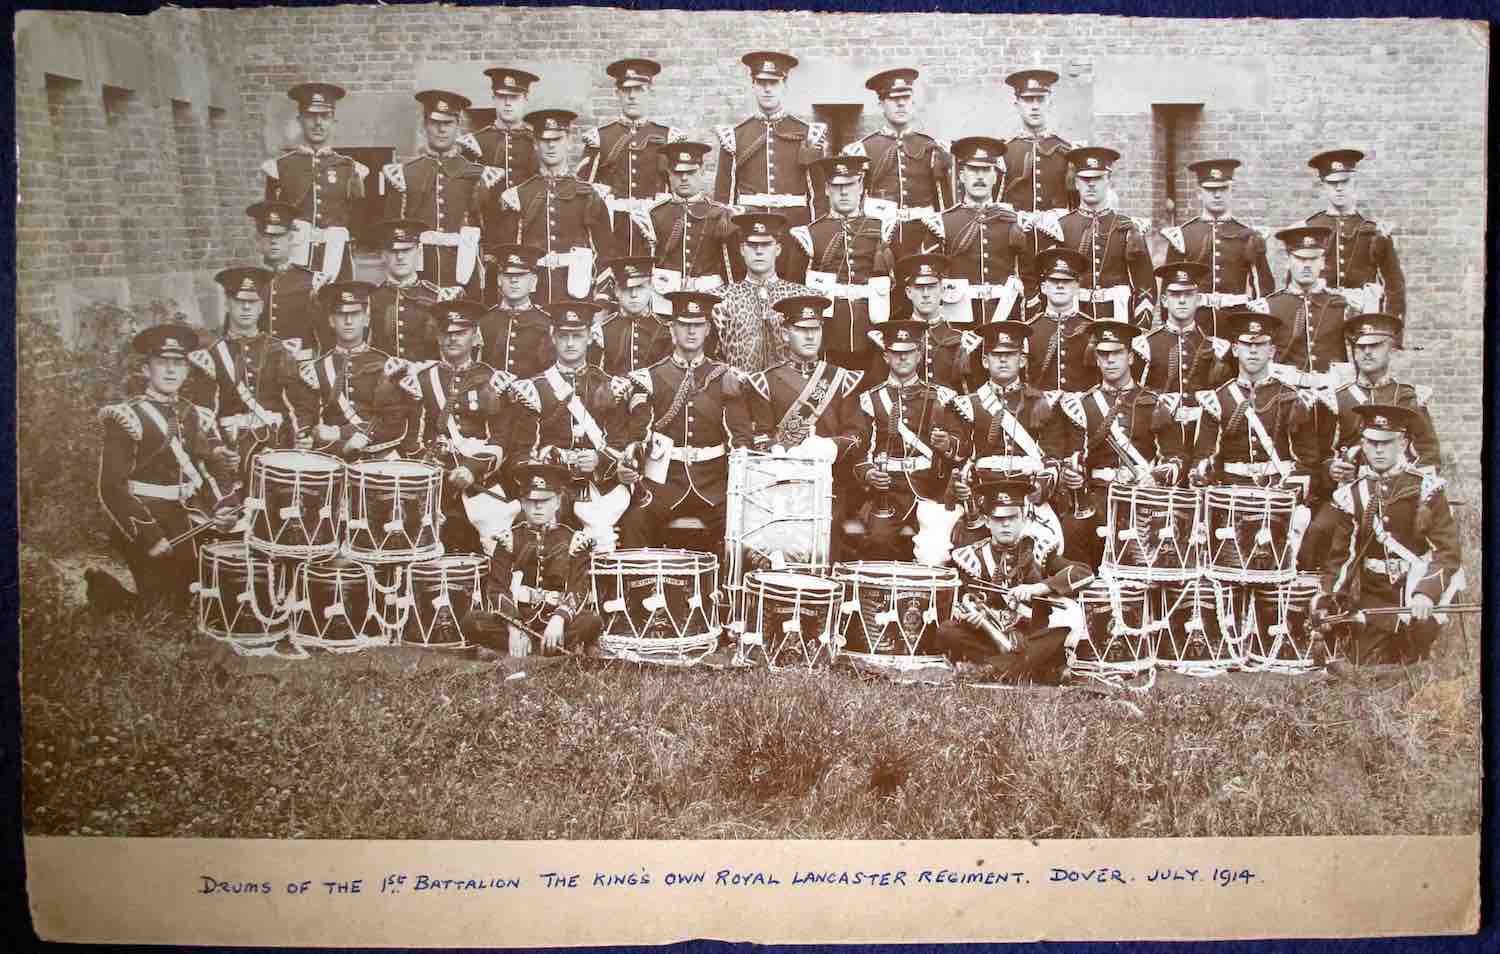 Photo of Drums of the 1st Battalion, The King's Own Royal Lancaster Regiment, Dover, July 1914